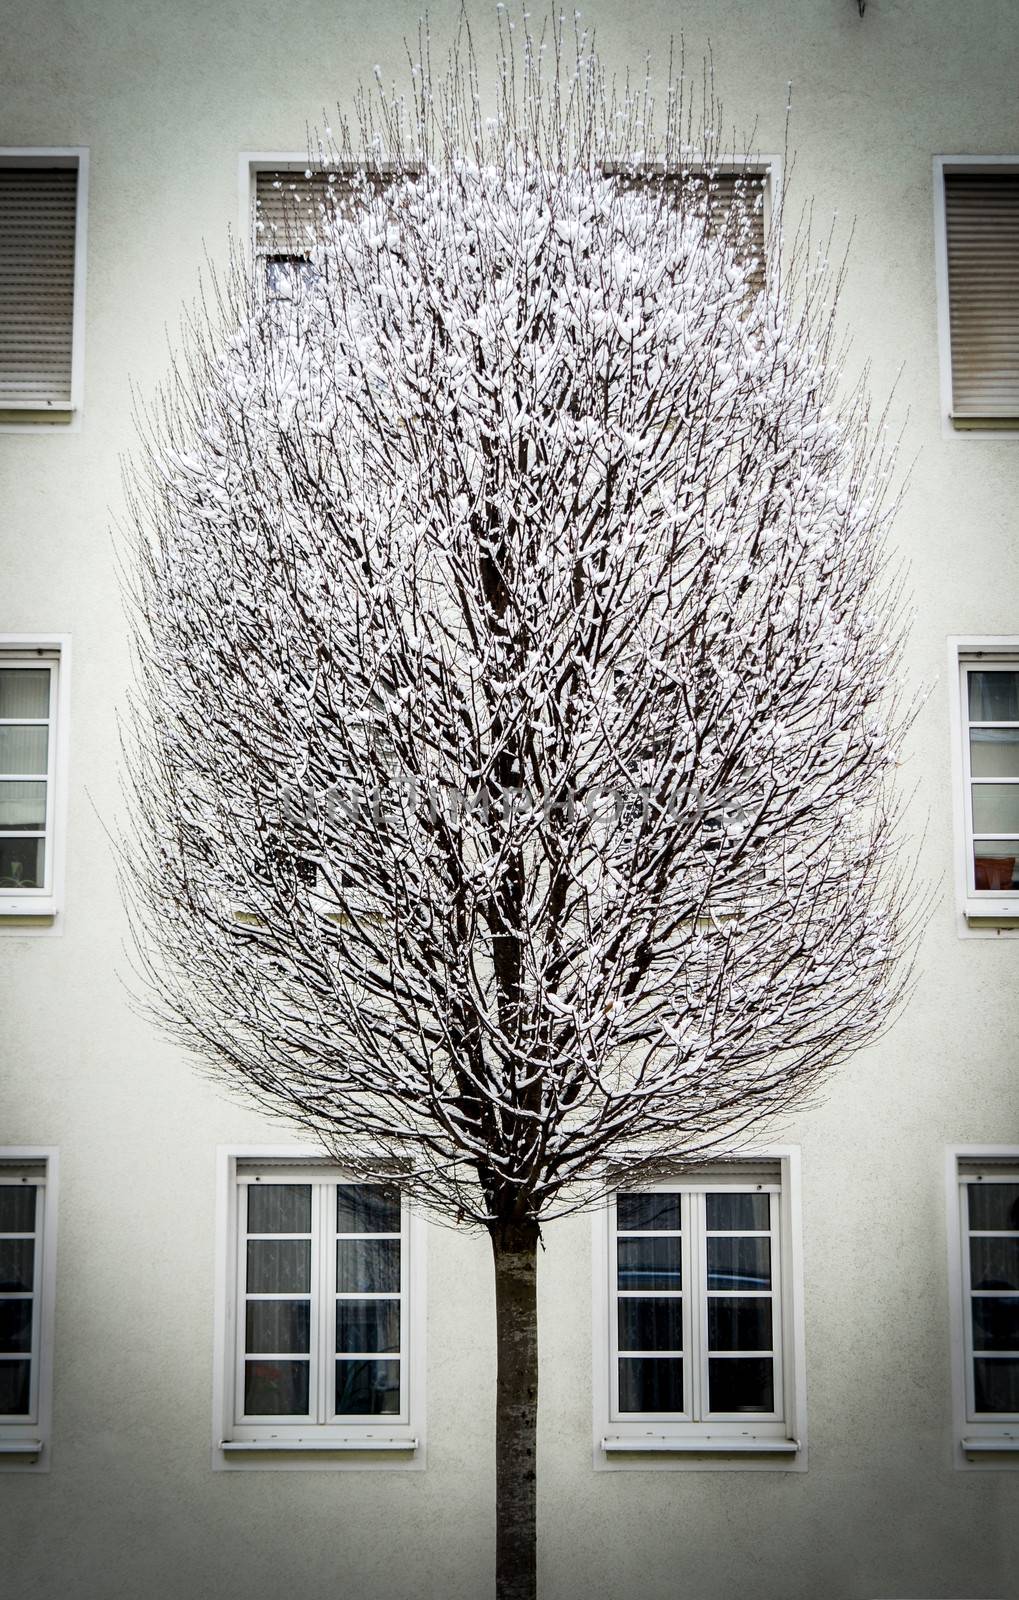 Winter Image Of A Snowy Tree In A City